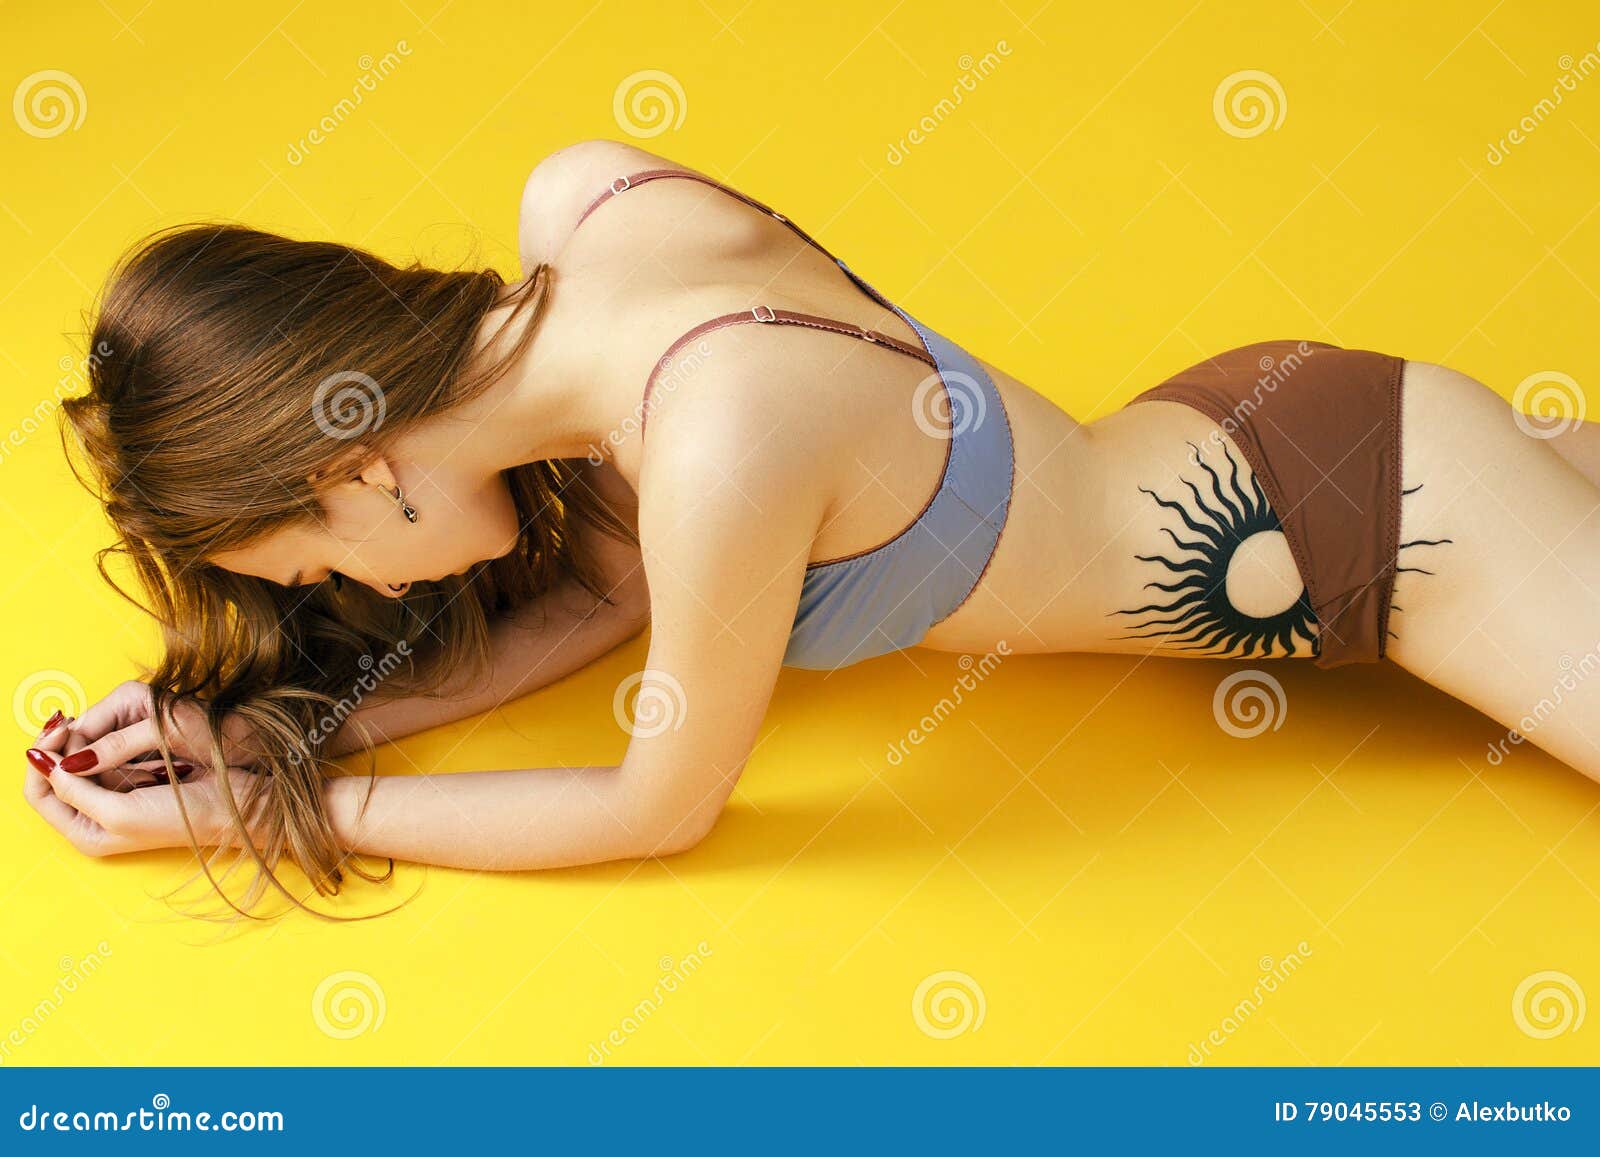 Skinny Girl on a Yellow Background in Beautiful Lingerie Stock